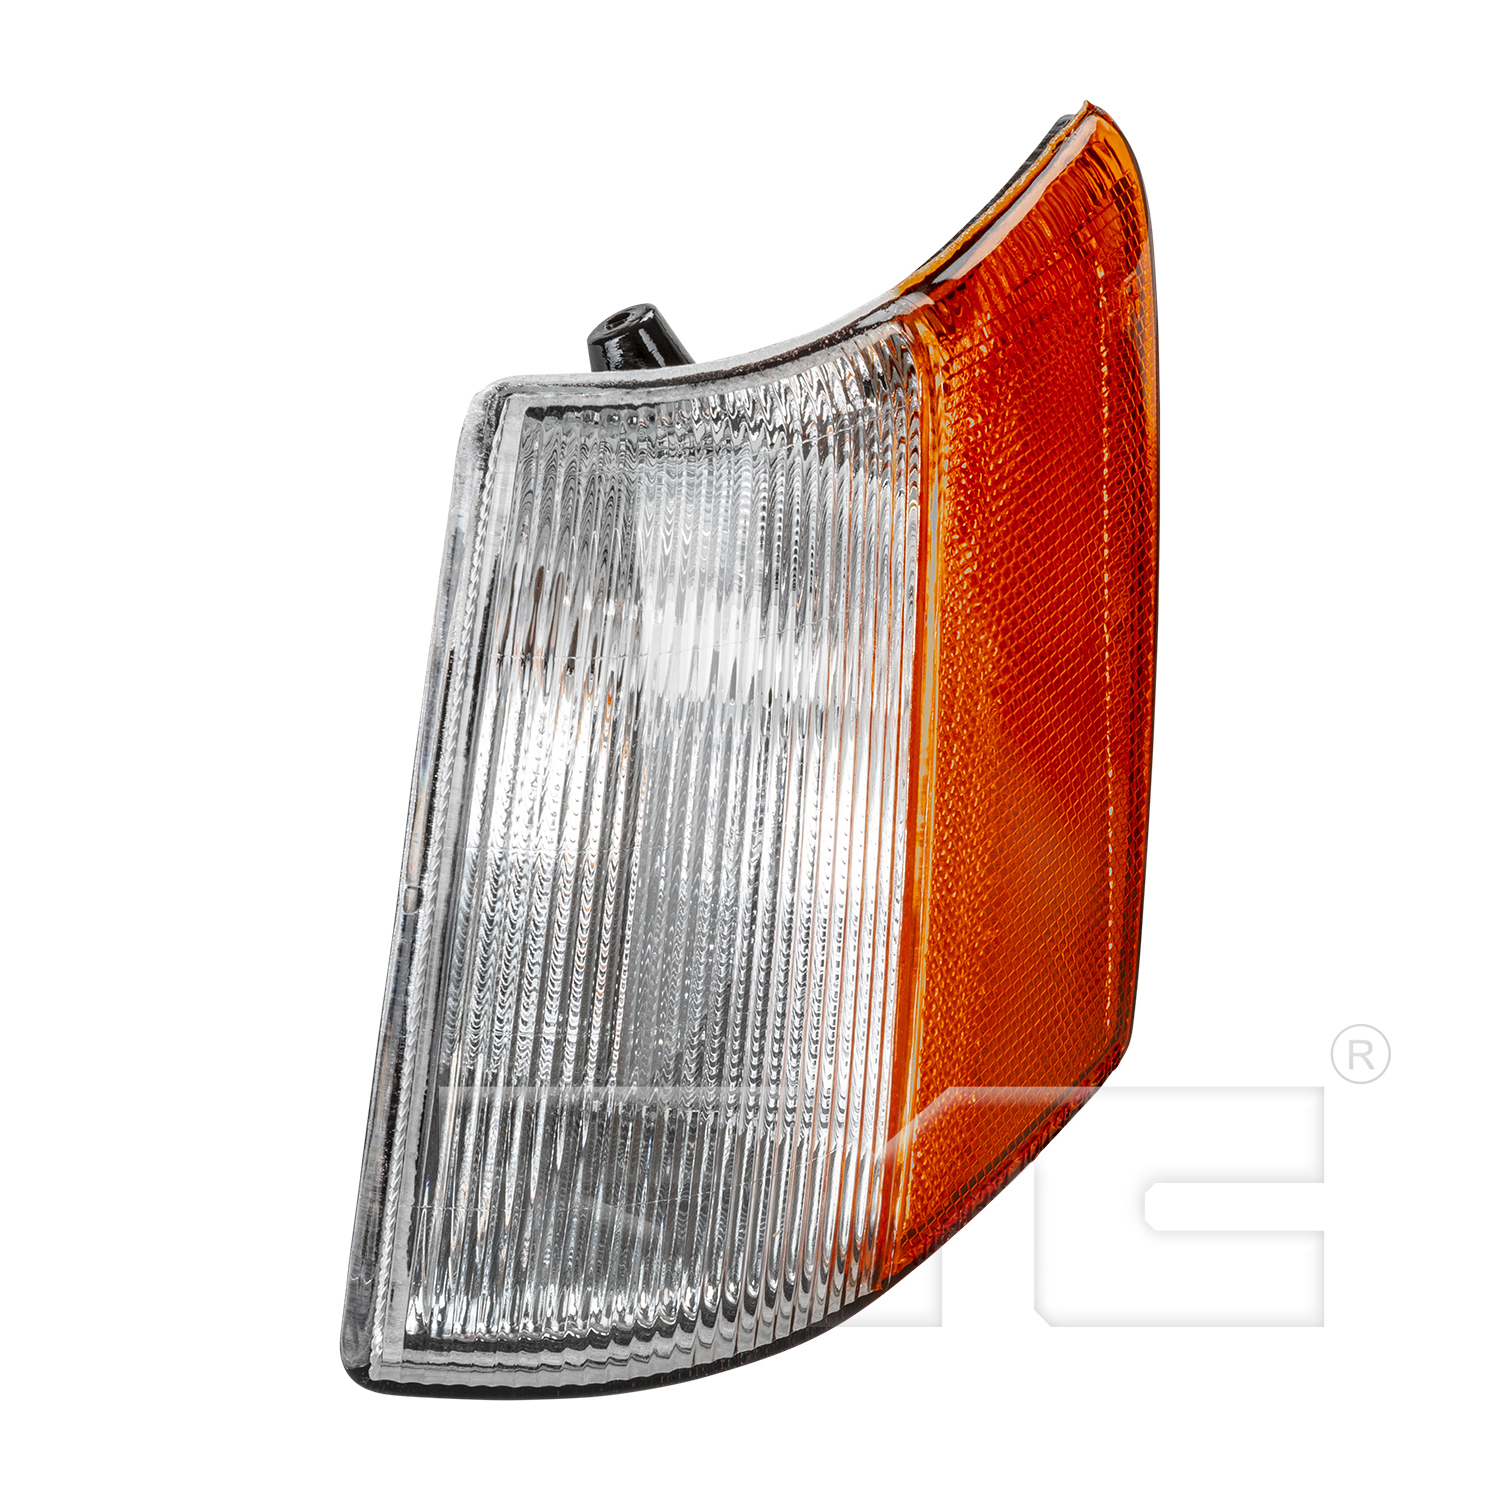 Aftermarket LAMPS for JEEP - GRAND CHEROKEE, GRAND CHEROKEE,93-98,LT Parklamp assy